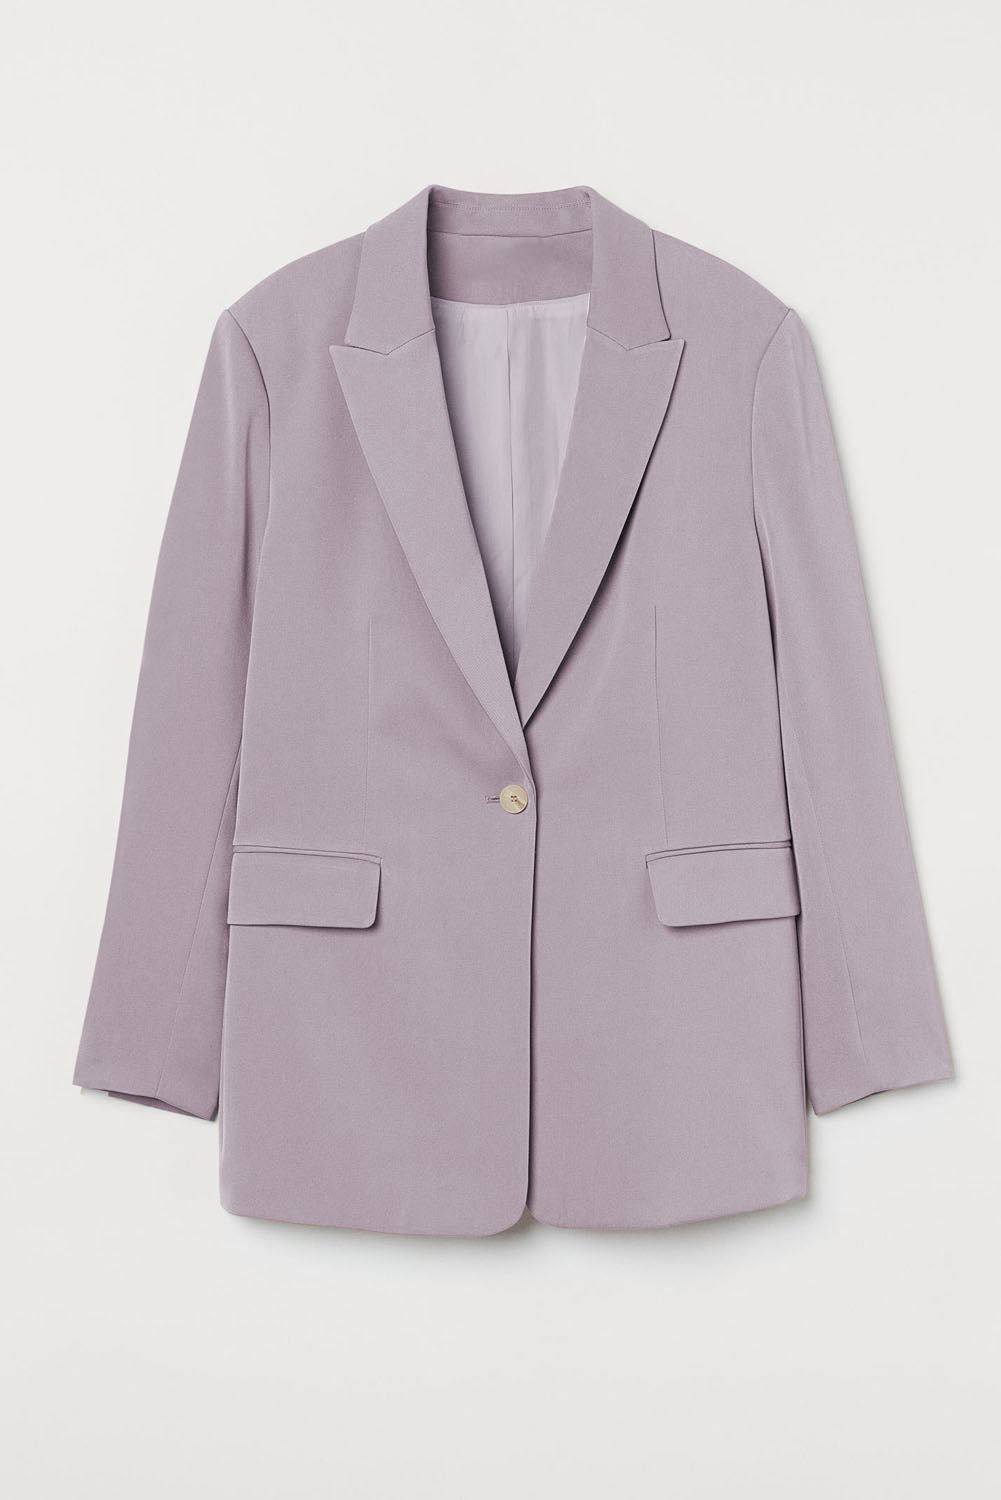 LC852375-8-S, LC852375-8-M, LC852375-8-L, LC852375-8-XL, LC852375-8-2XL, Purple Womens Casual Blazers Lapel Collar Button Work Office Jackets